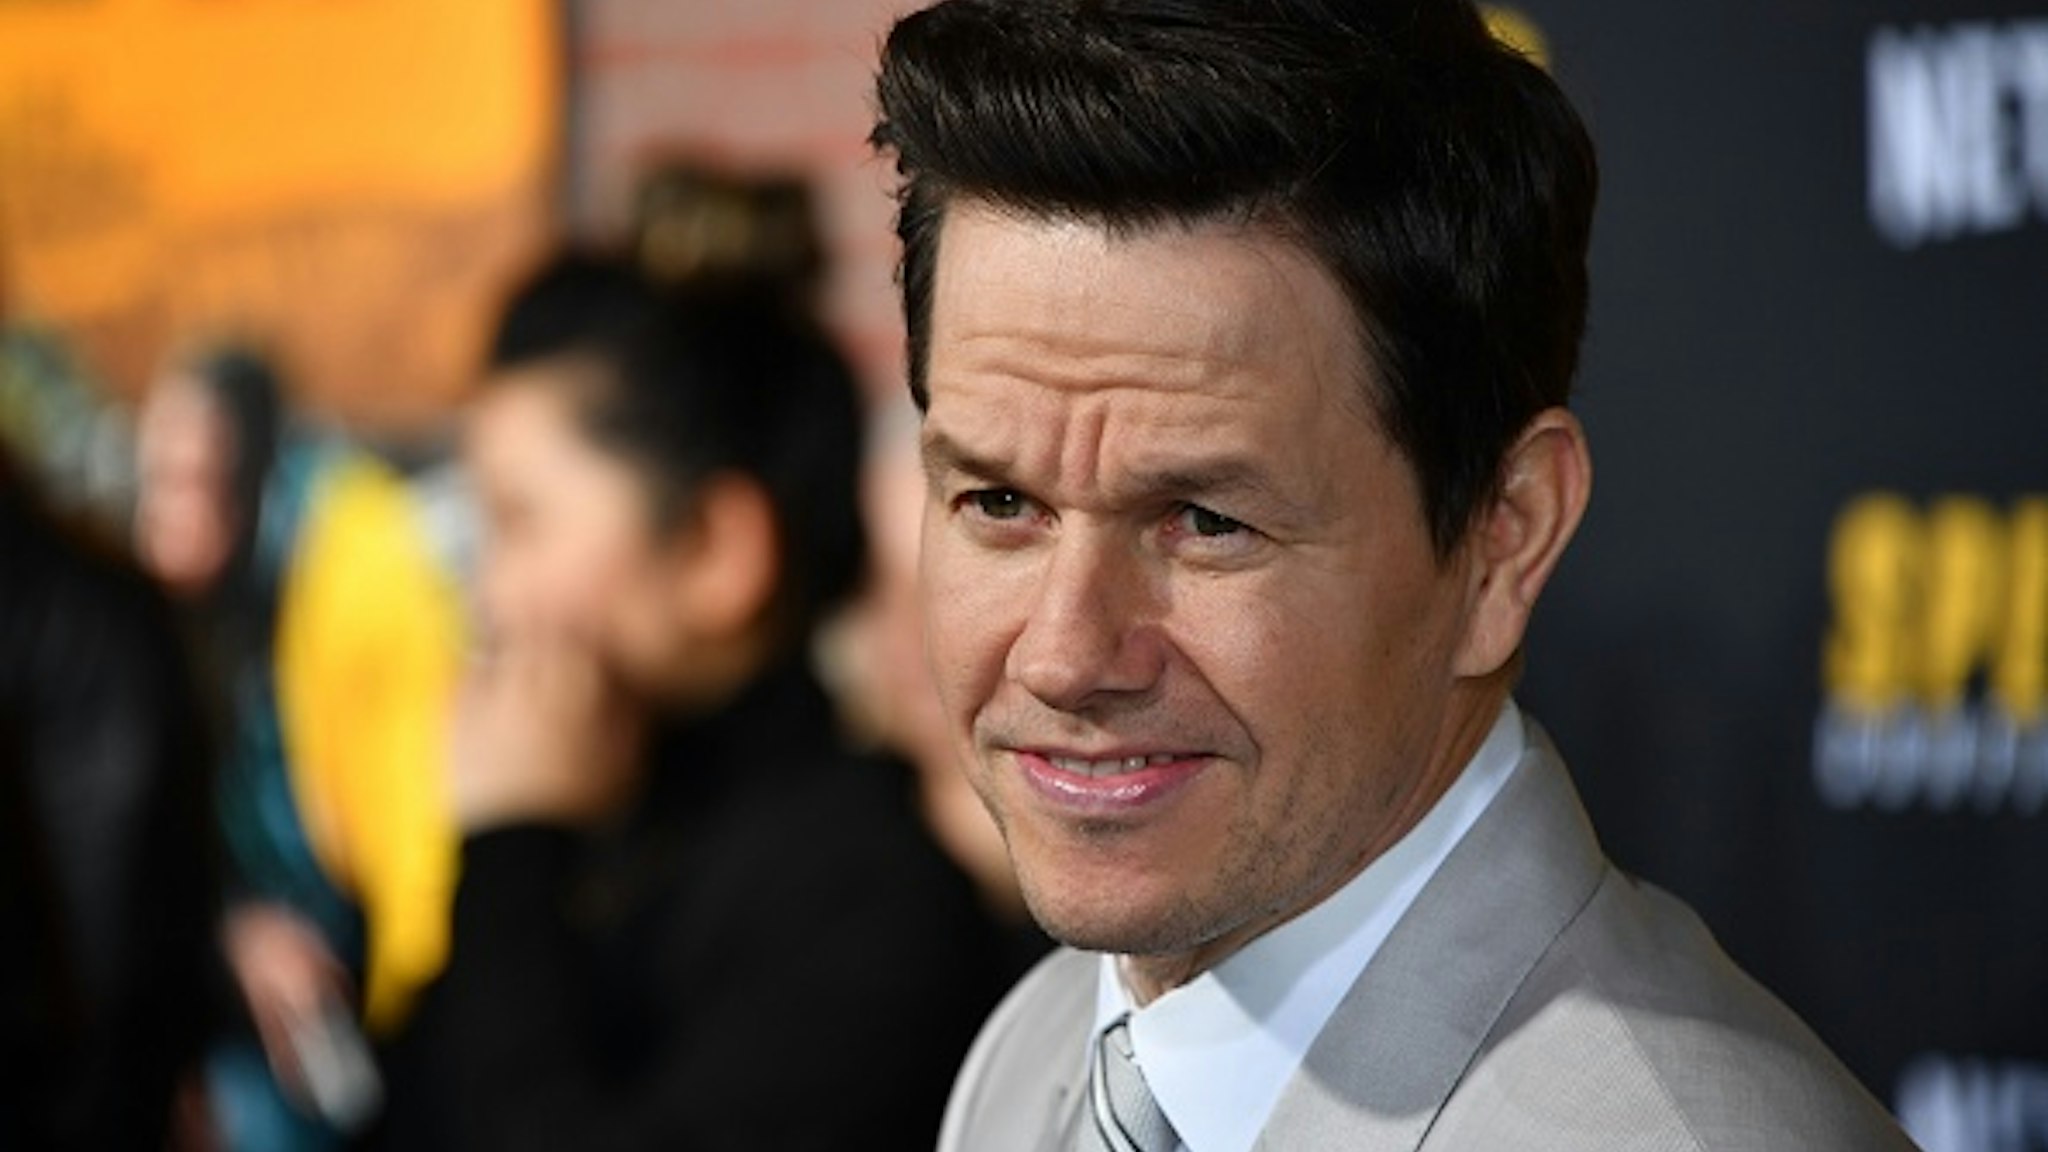 US actor Mark Wahlberg arrives for the premiere of Netflix's "Spenser Confidential" at Regency Village Theatre in Westwood, California, on February 27, 2020.